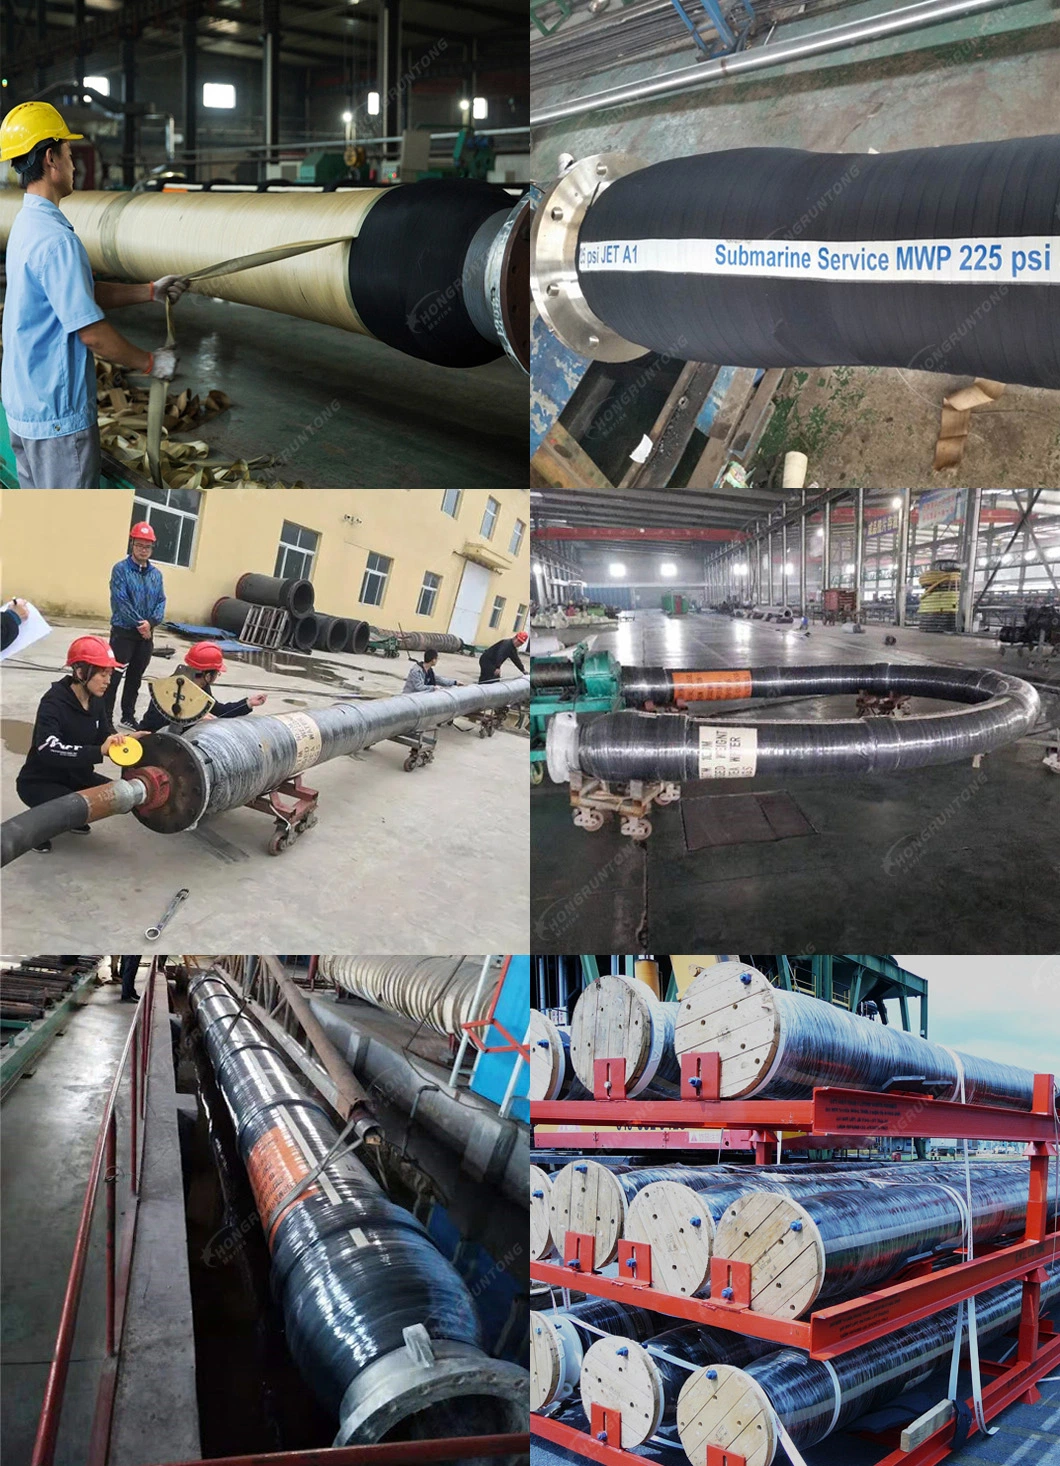 Professional Factory BV Certificates 16/20in Single Carcass Tail Submarine Hose